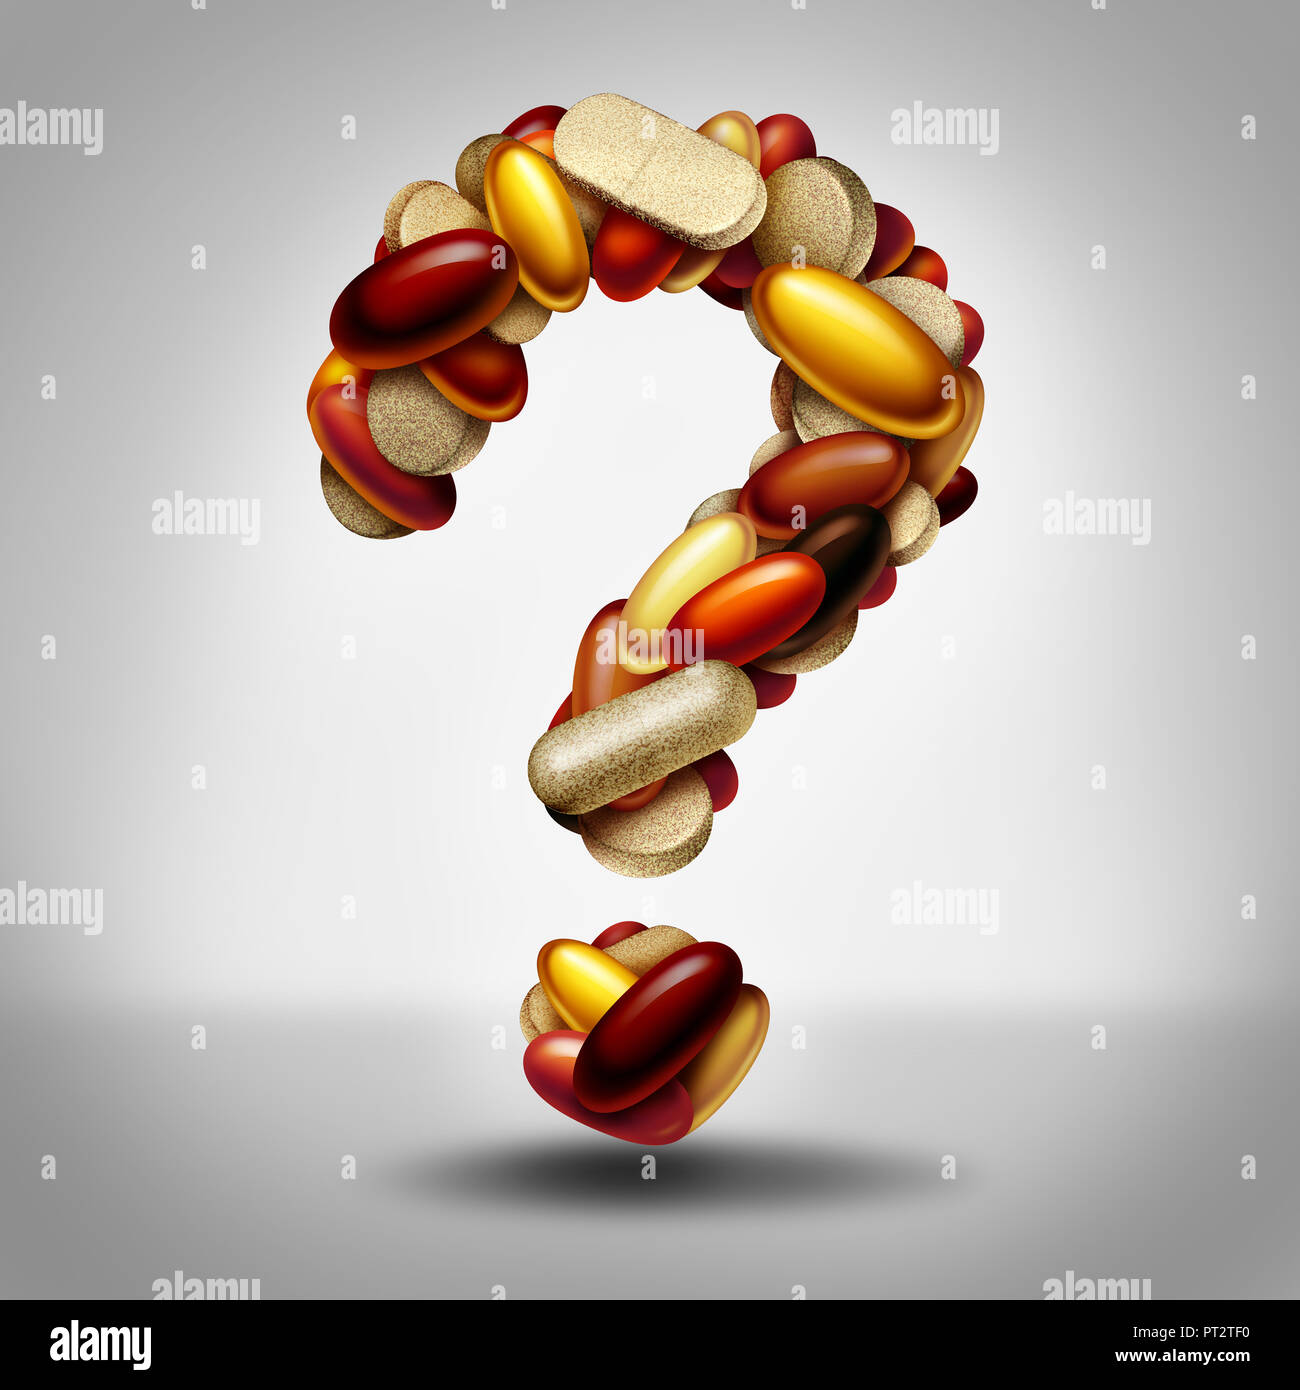 Health supplements as a group of vitamin and supplement pills and capsules shaped as a question mark as a natural nutrient medicine and health. Stock Photo